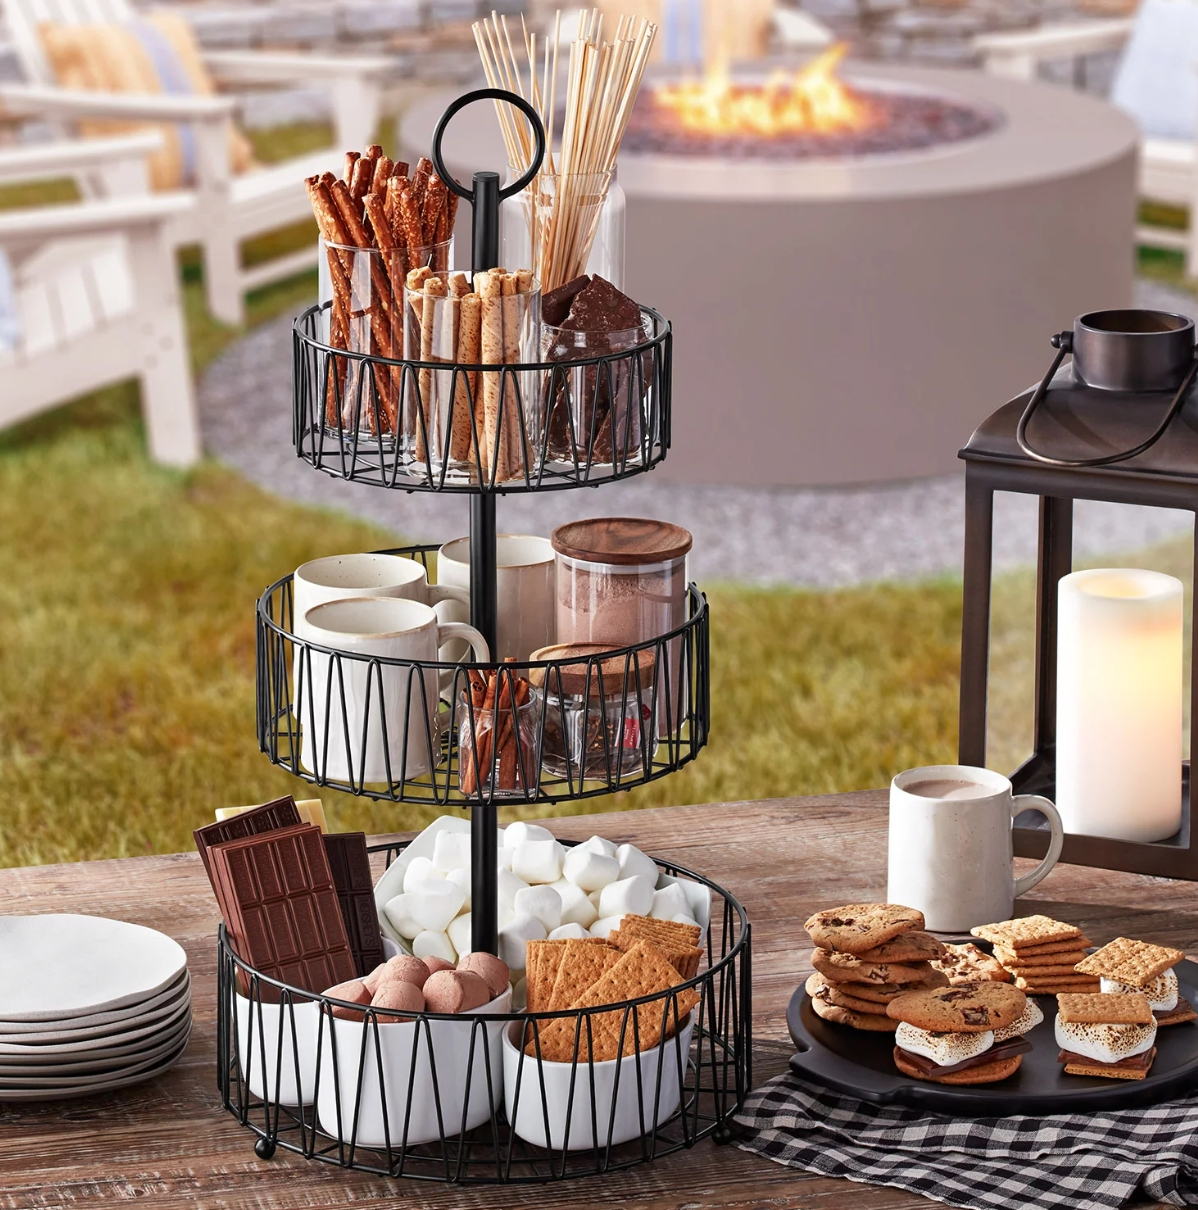 Three tiered basket holding supplies for s'mores like graham crackers, marshmallows, chocolate, and a row of hot chocolate supplies too.